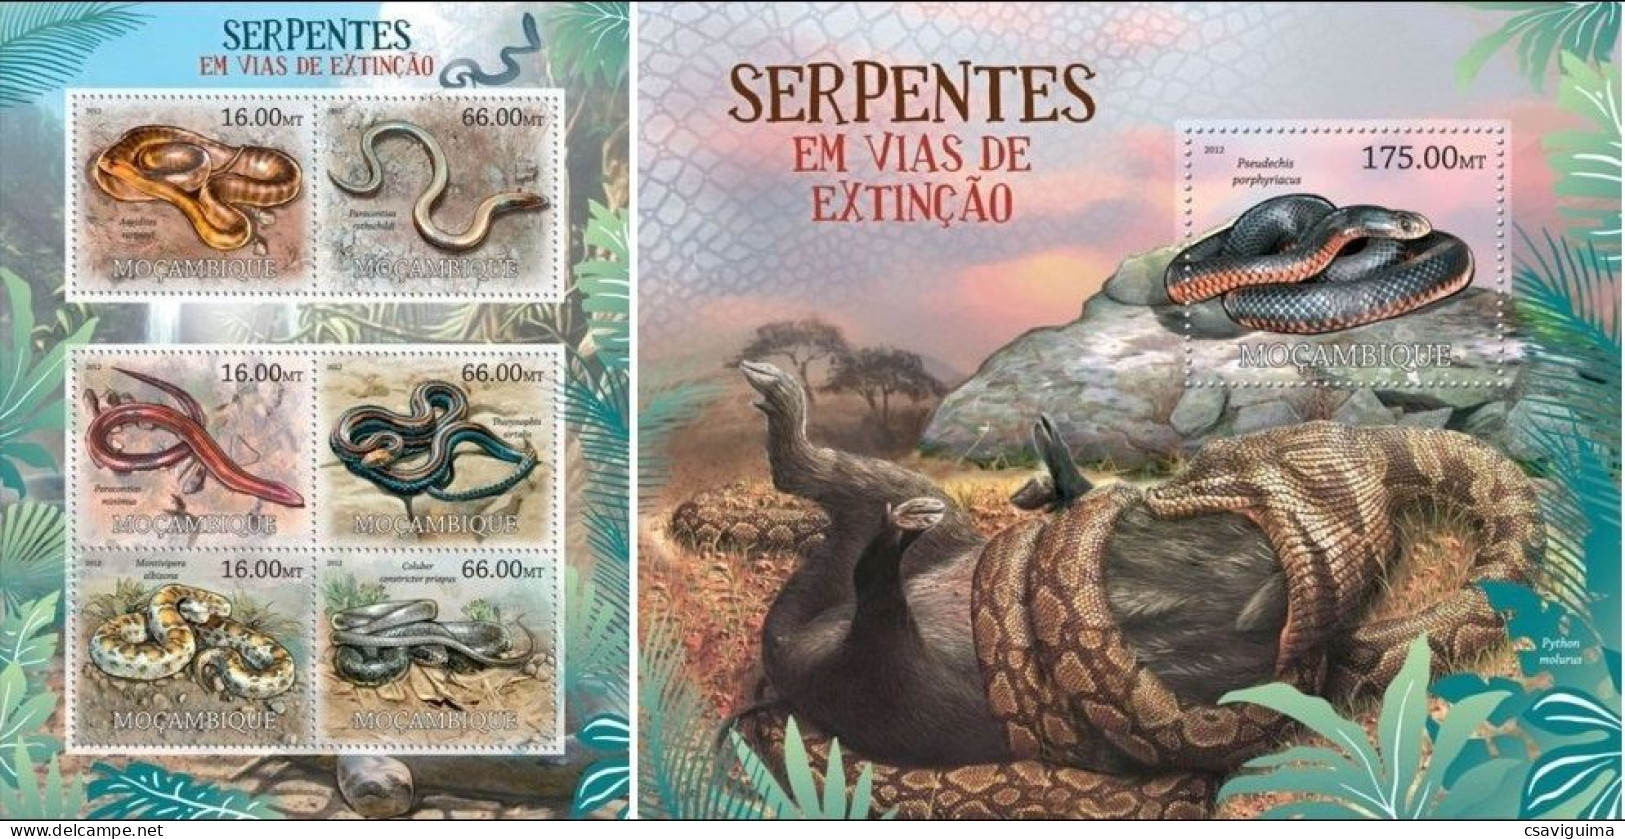 Mozambique - 2012 - Snakes - Yv 4731/36 + Bf 561 - Serpientes